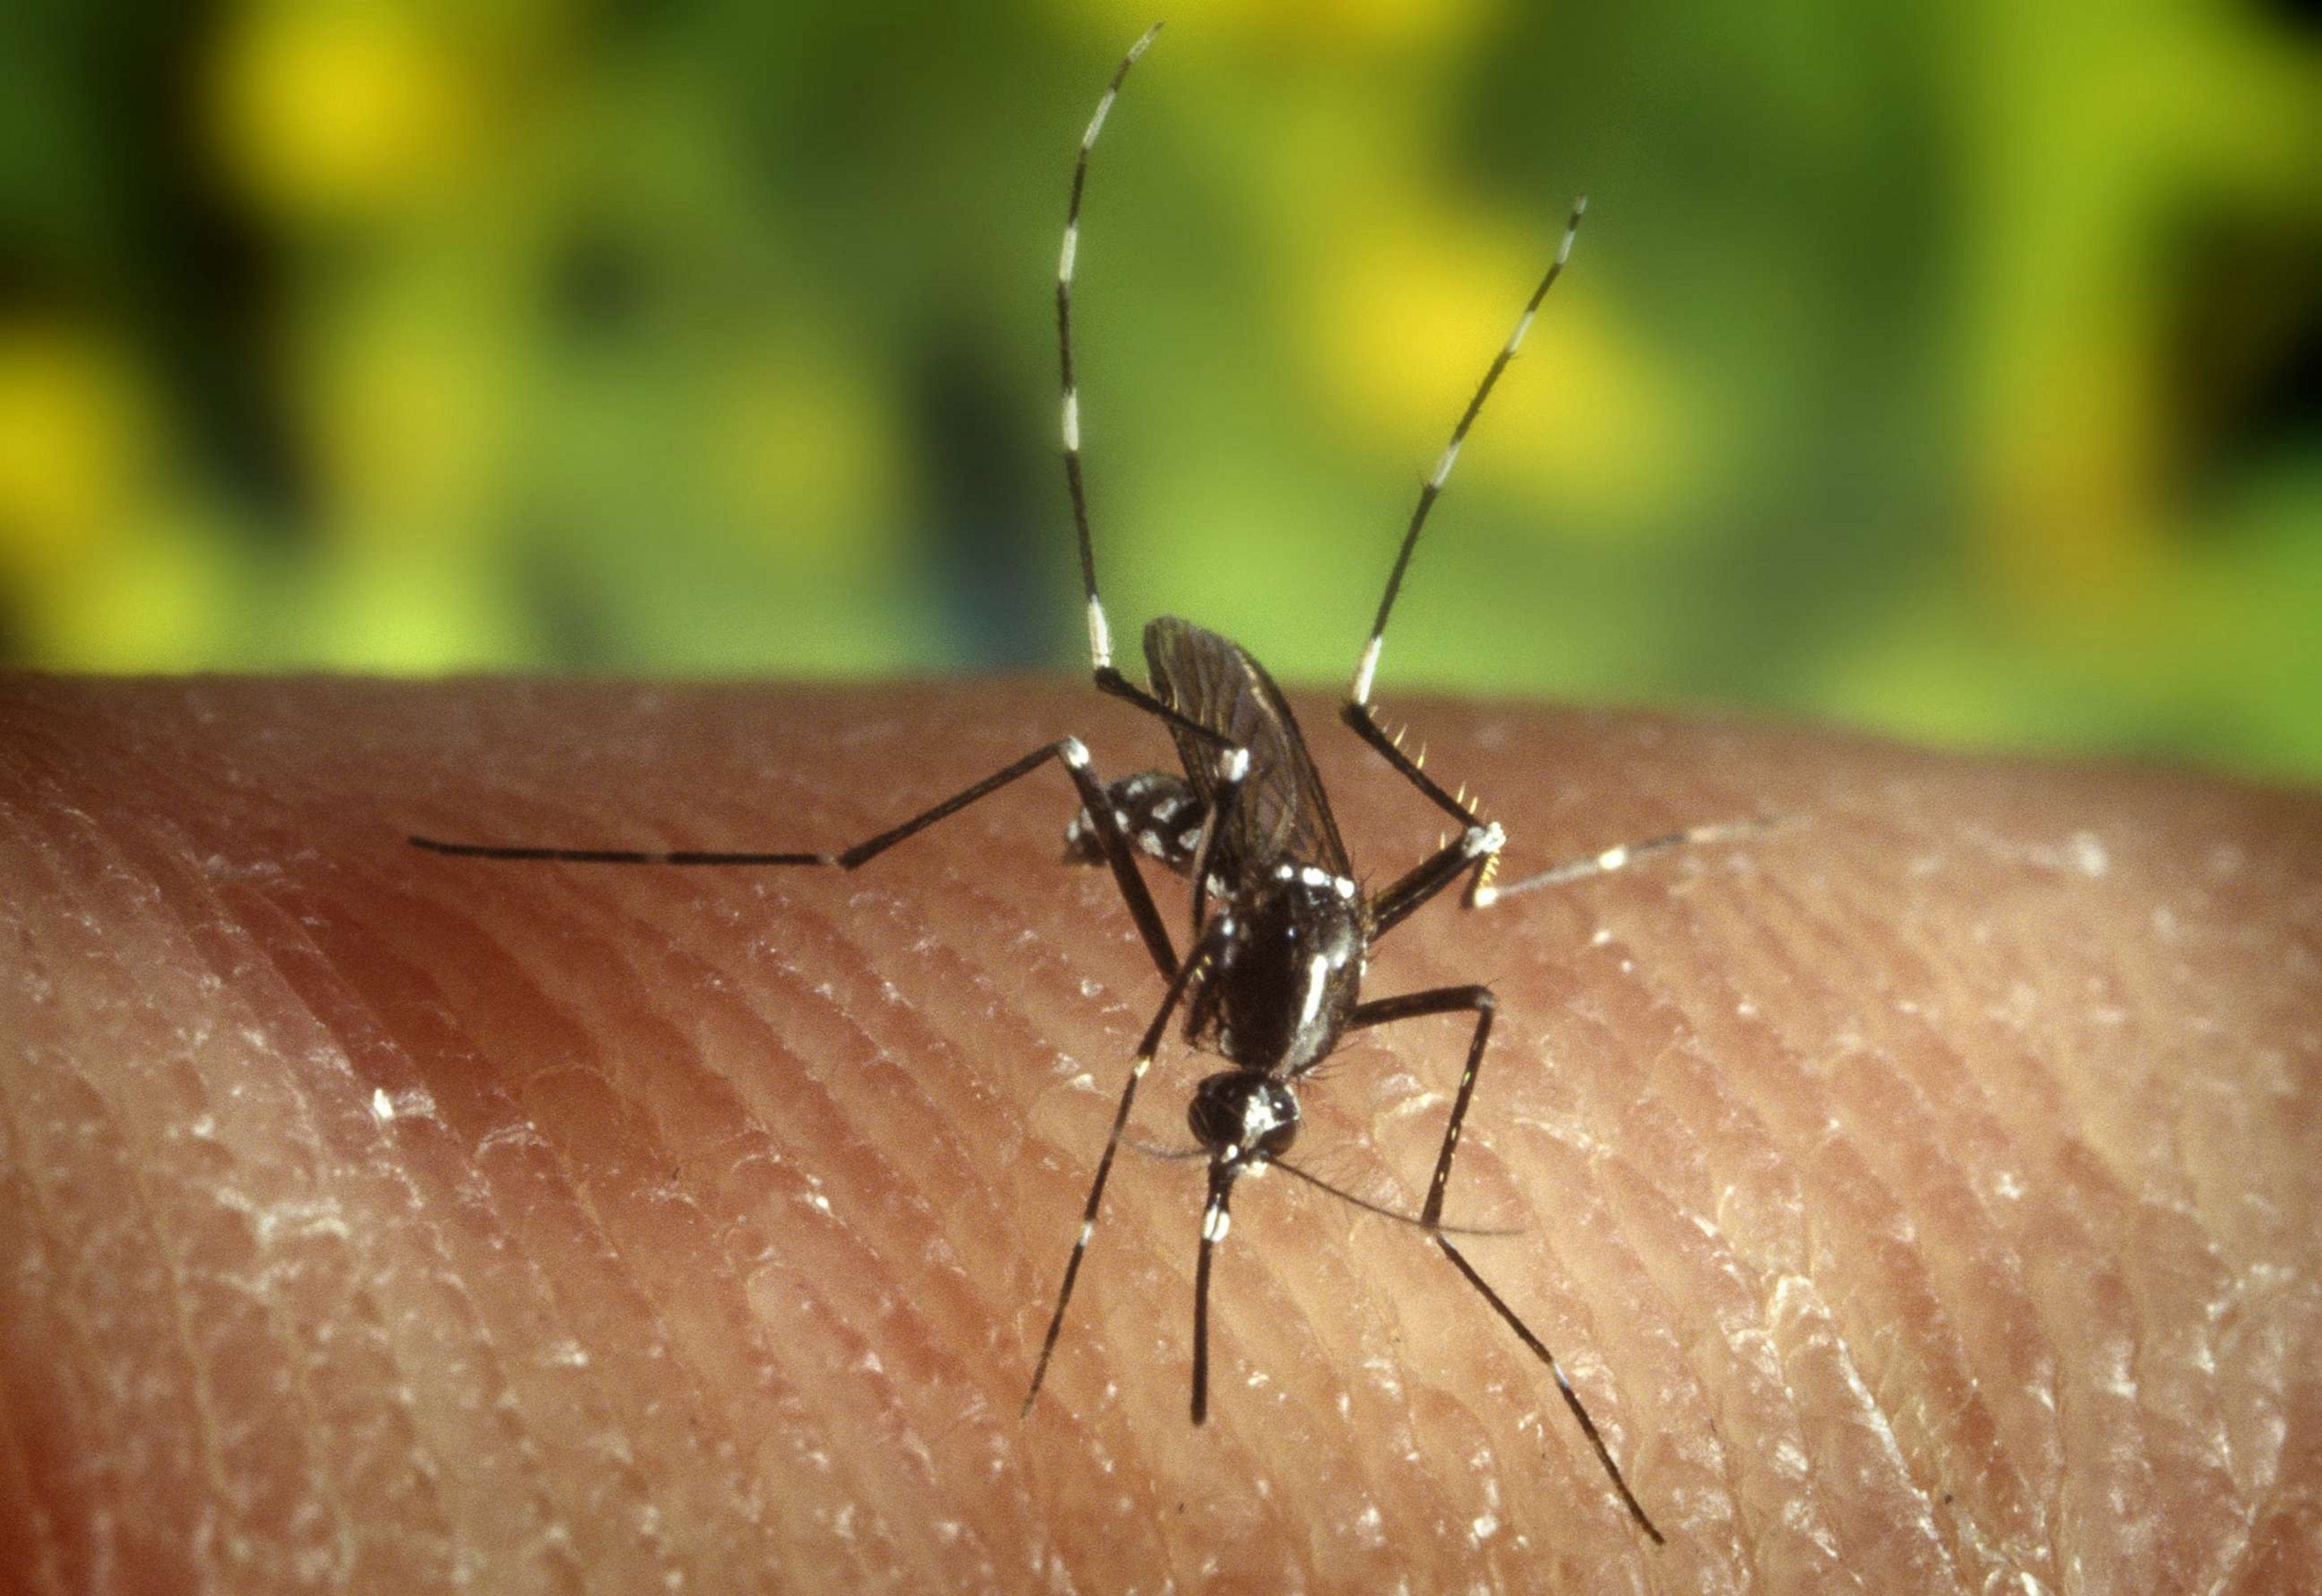 PHOTO: A female Aedes albopictus mosquito feeding on a human host.